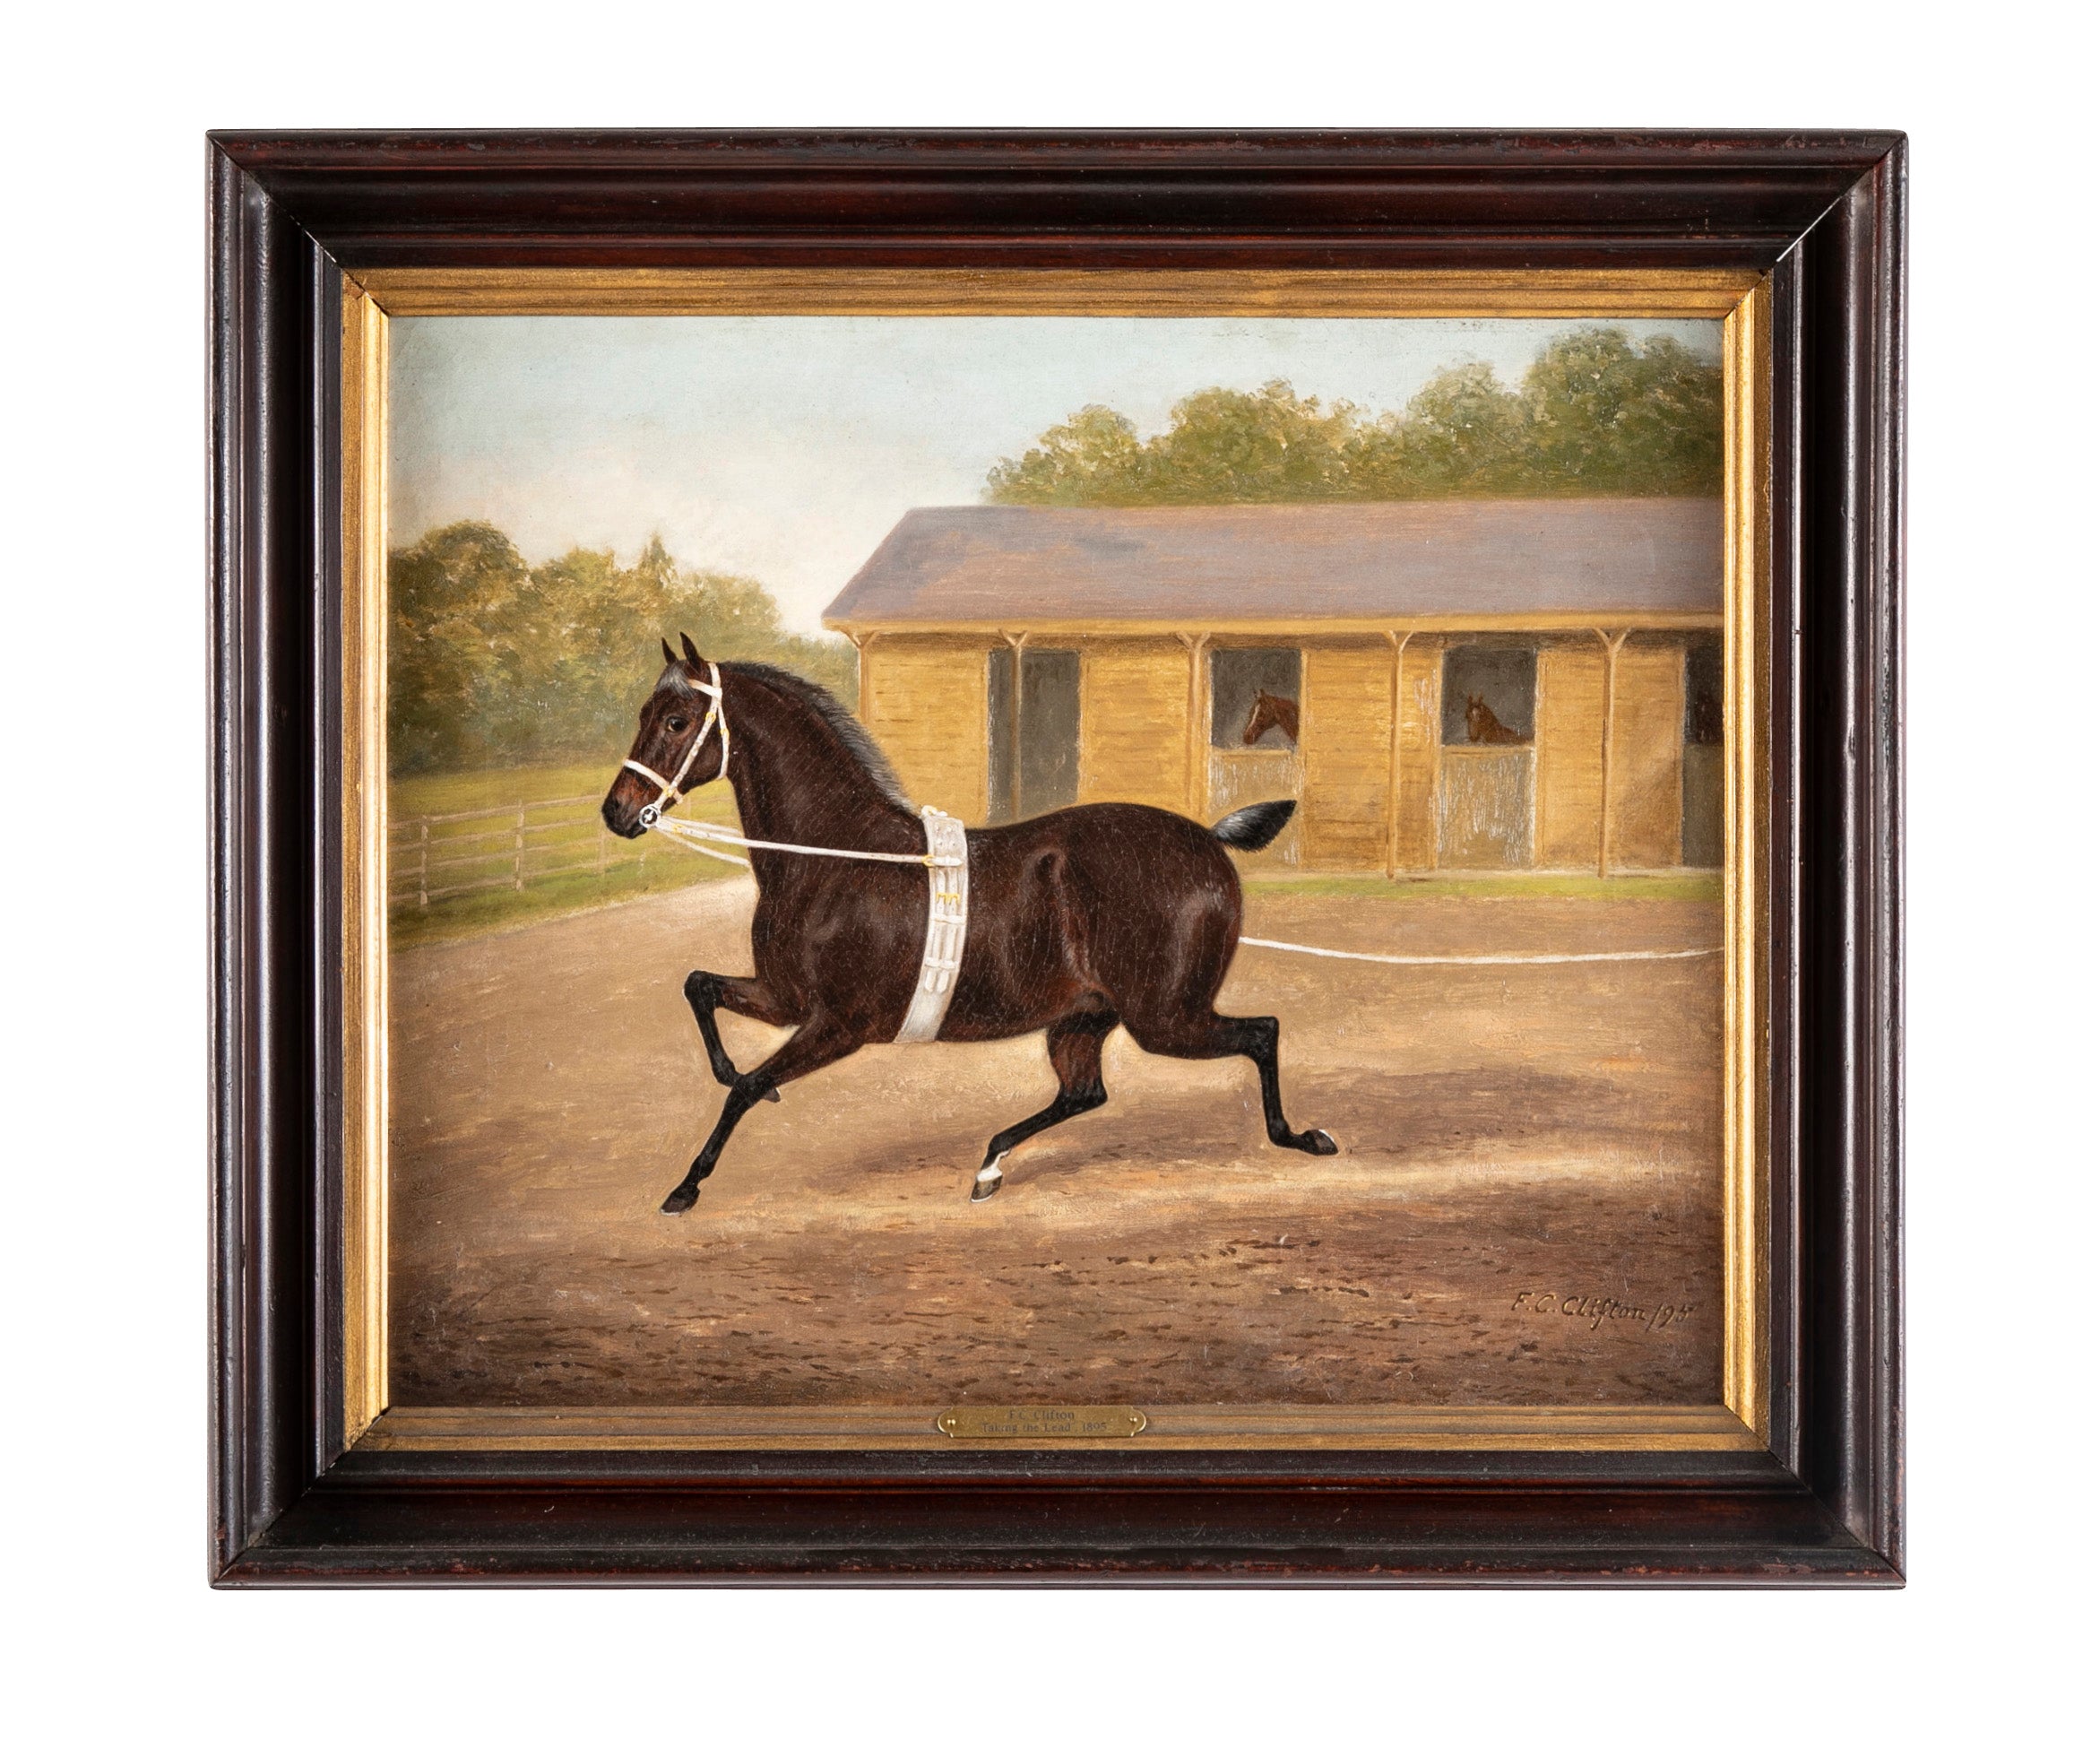 "Taking the Lead" Oil on Canvas by Equestrian Painter F. C. Clifton